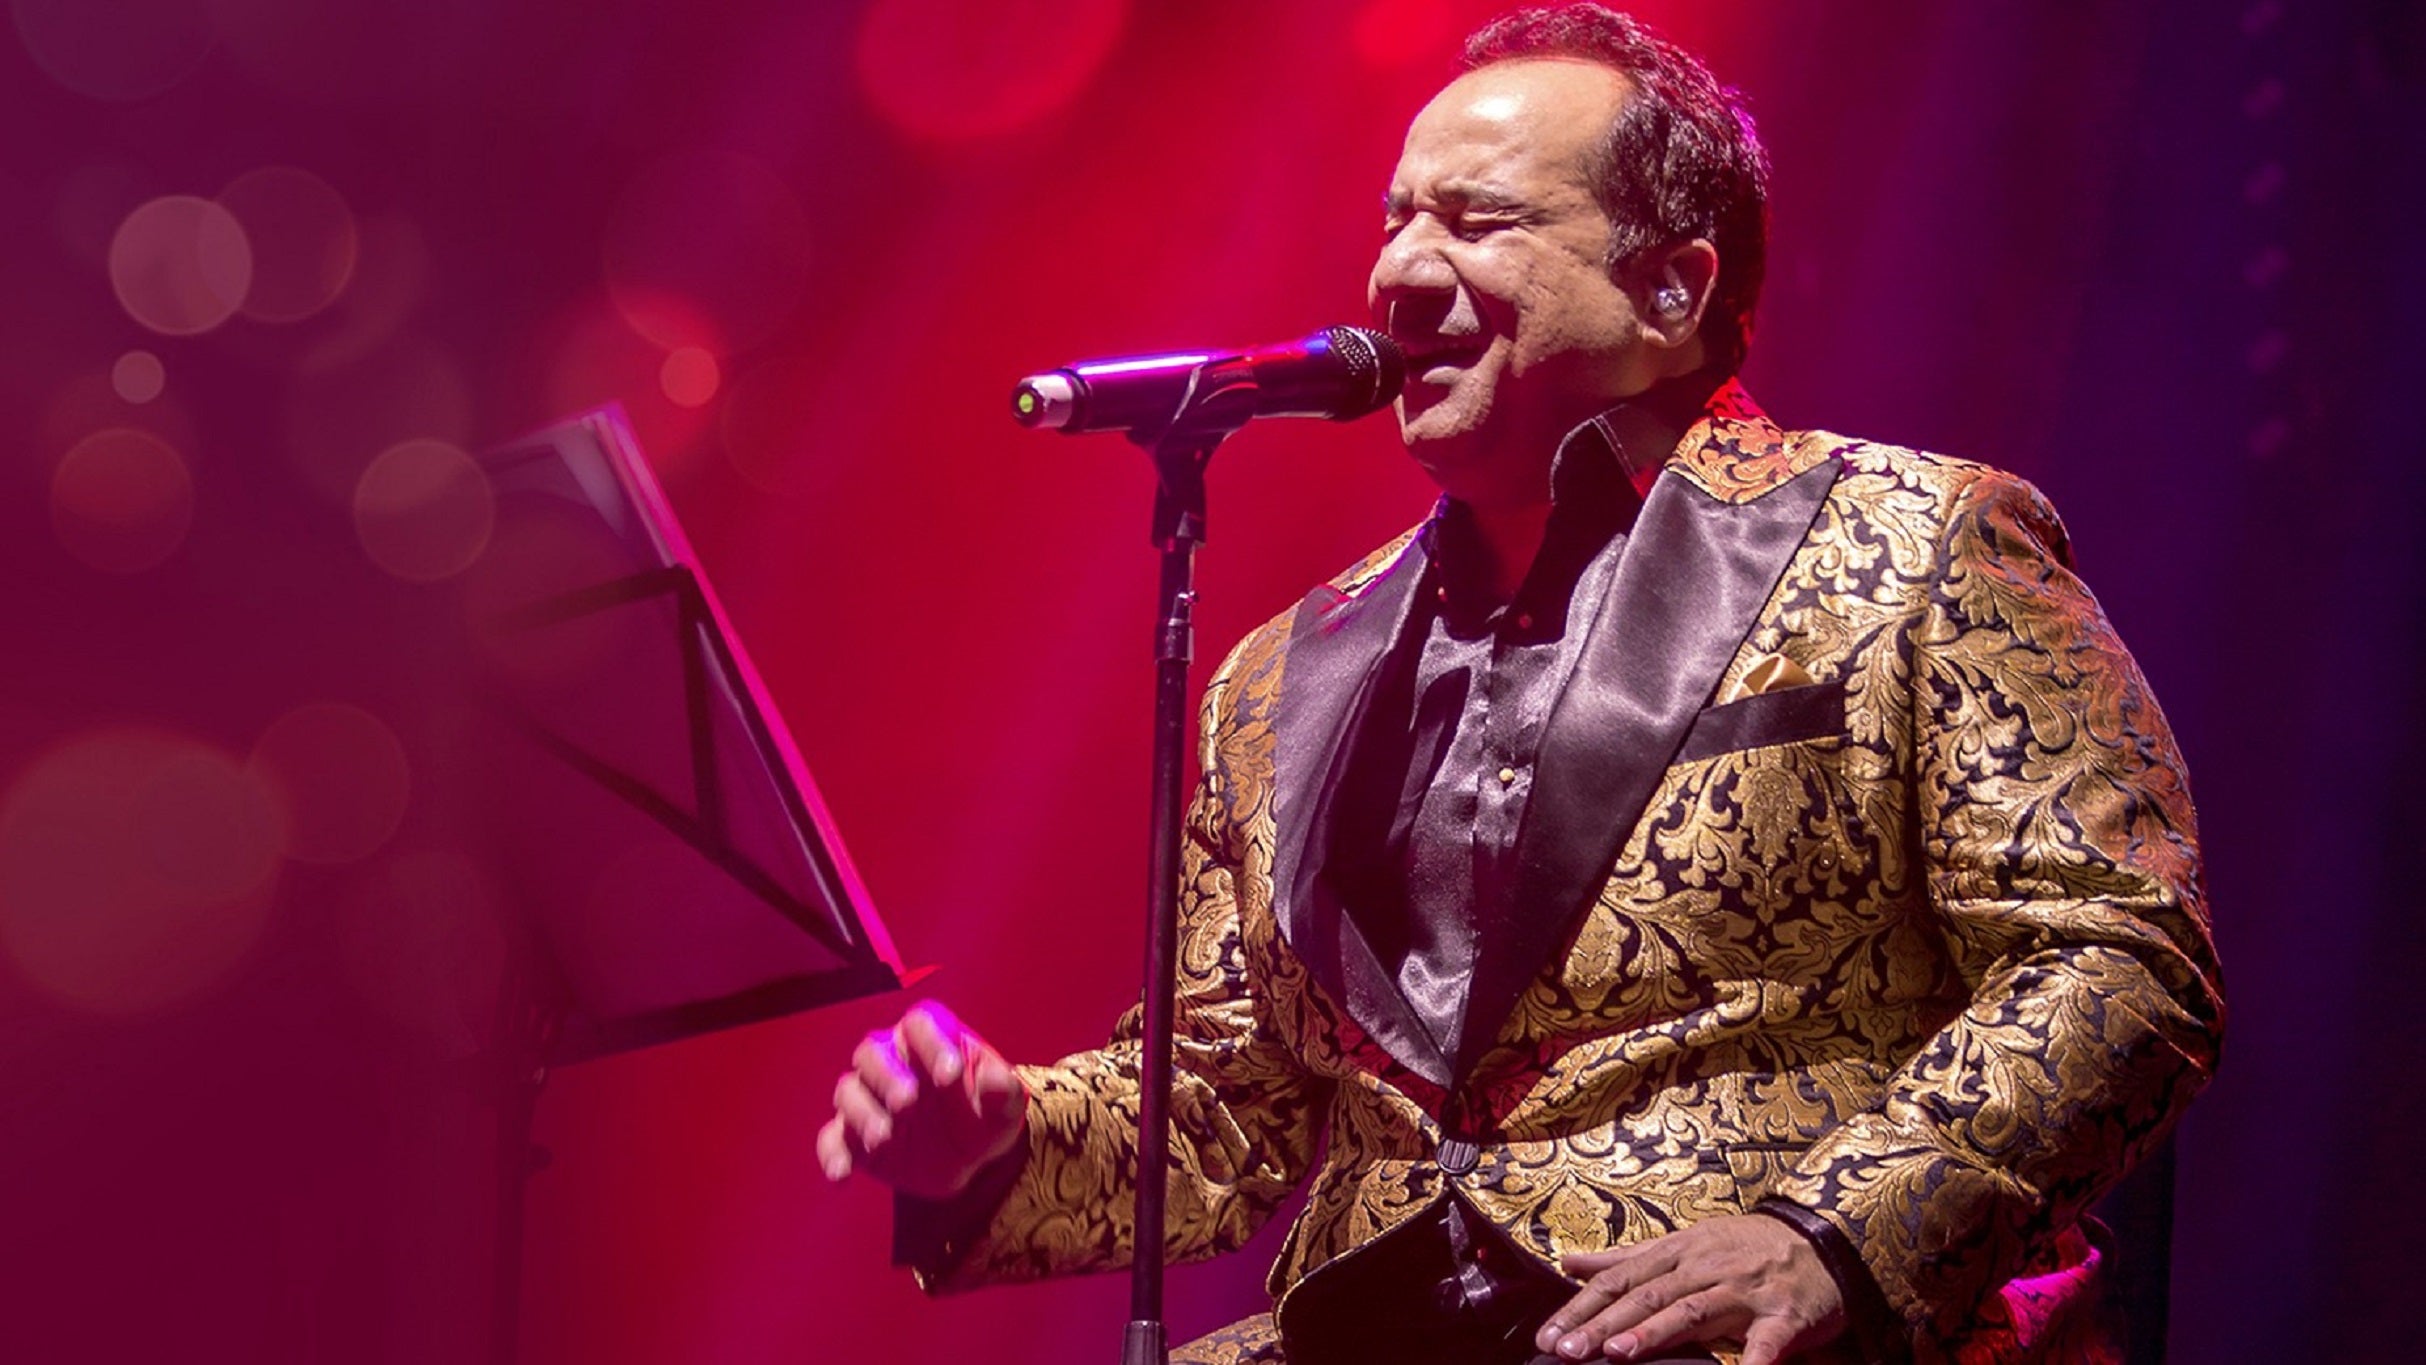 The Legacy Of Khan's Starring Rahat Fateh Ali Khan pre-sale passcode for legit tickets in Hollywood